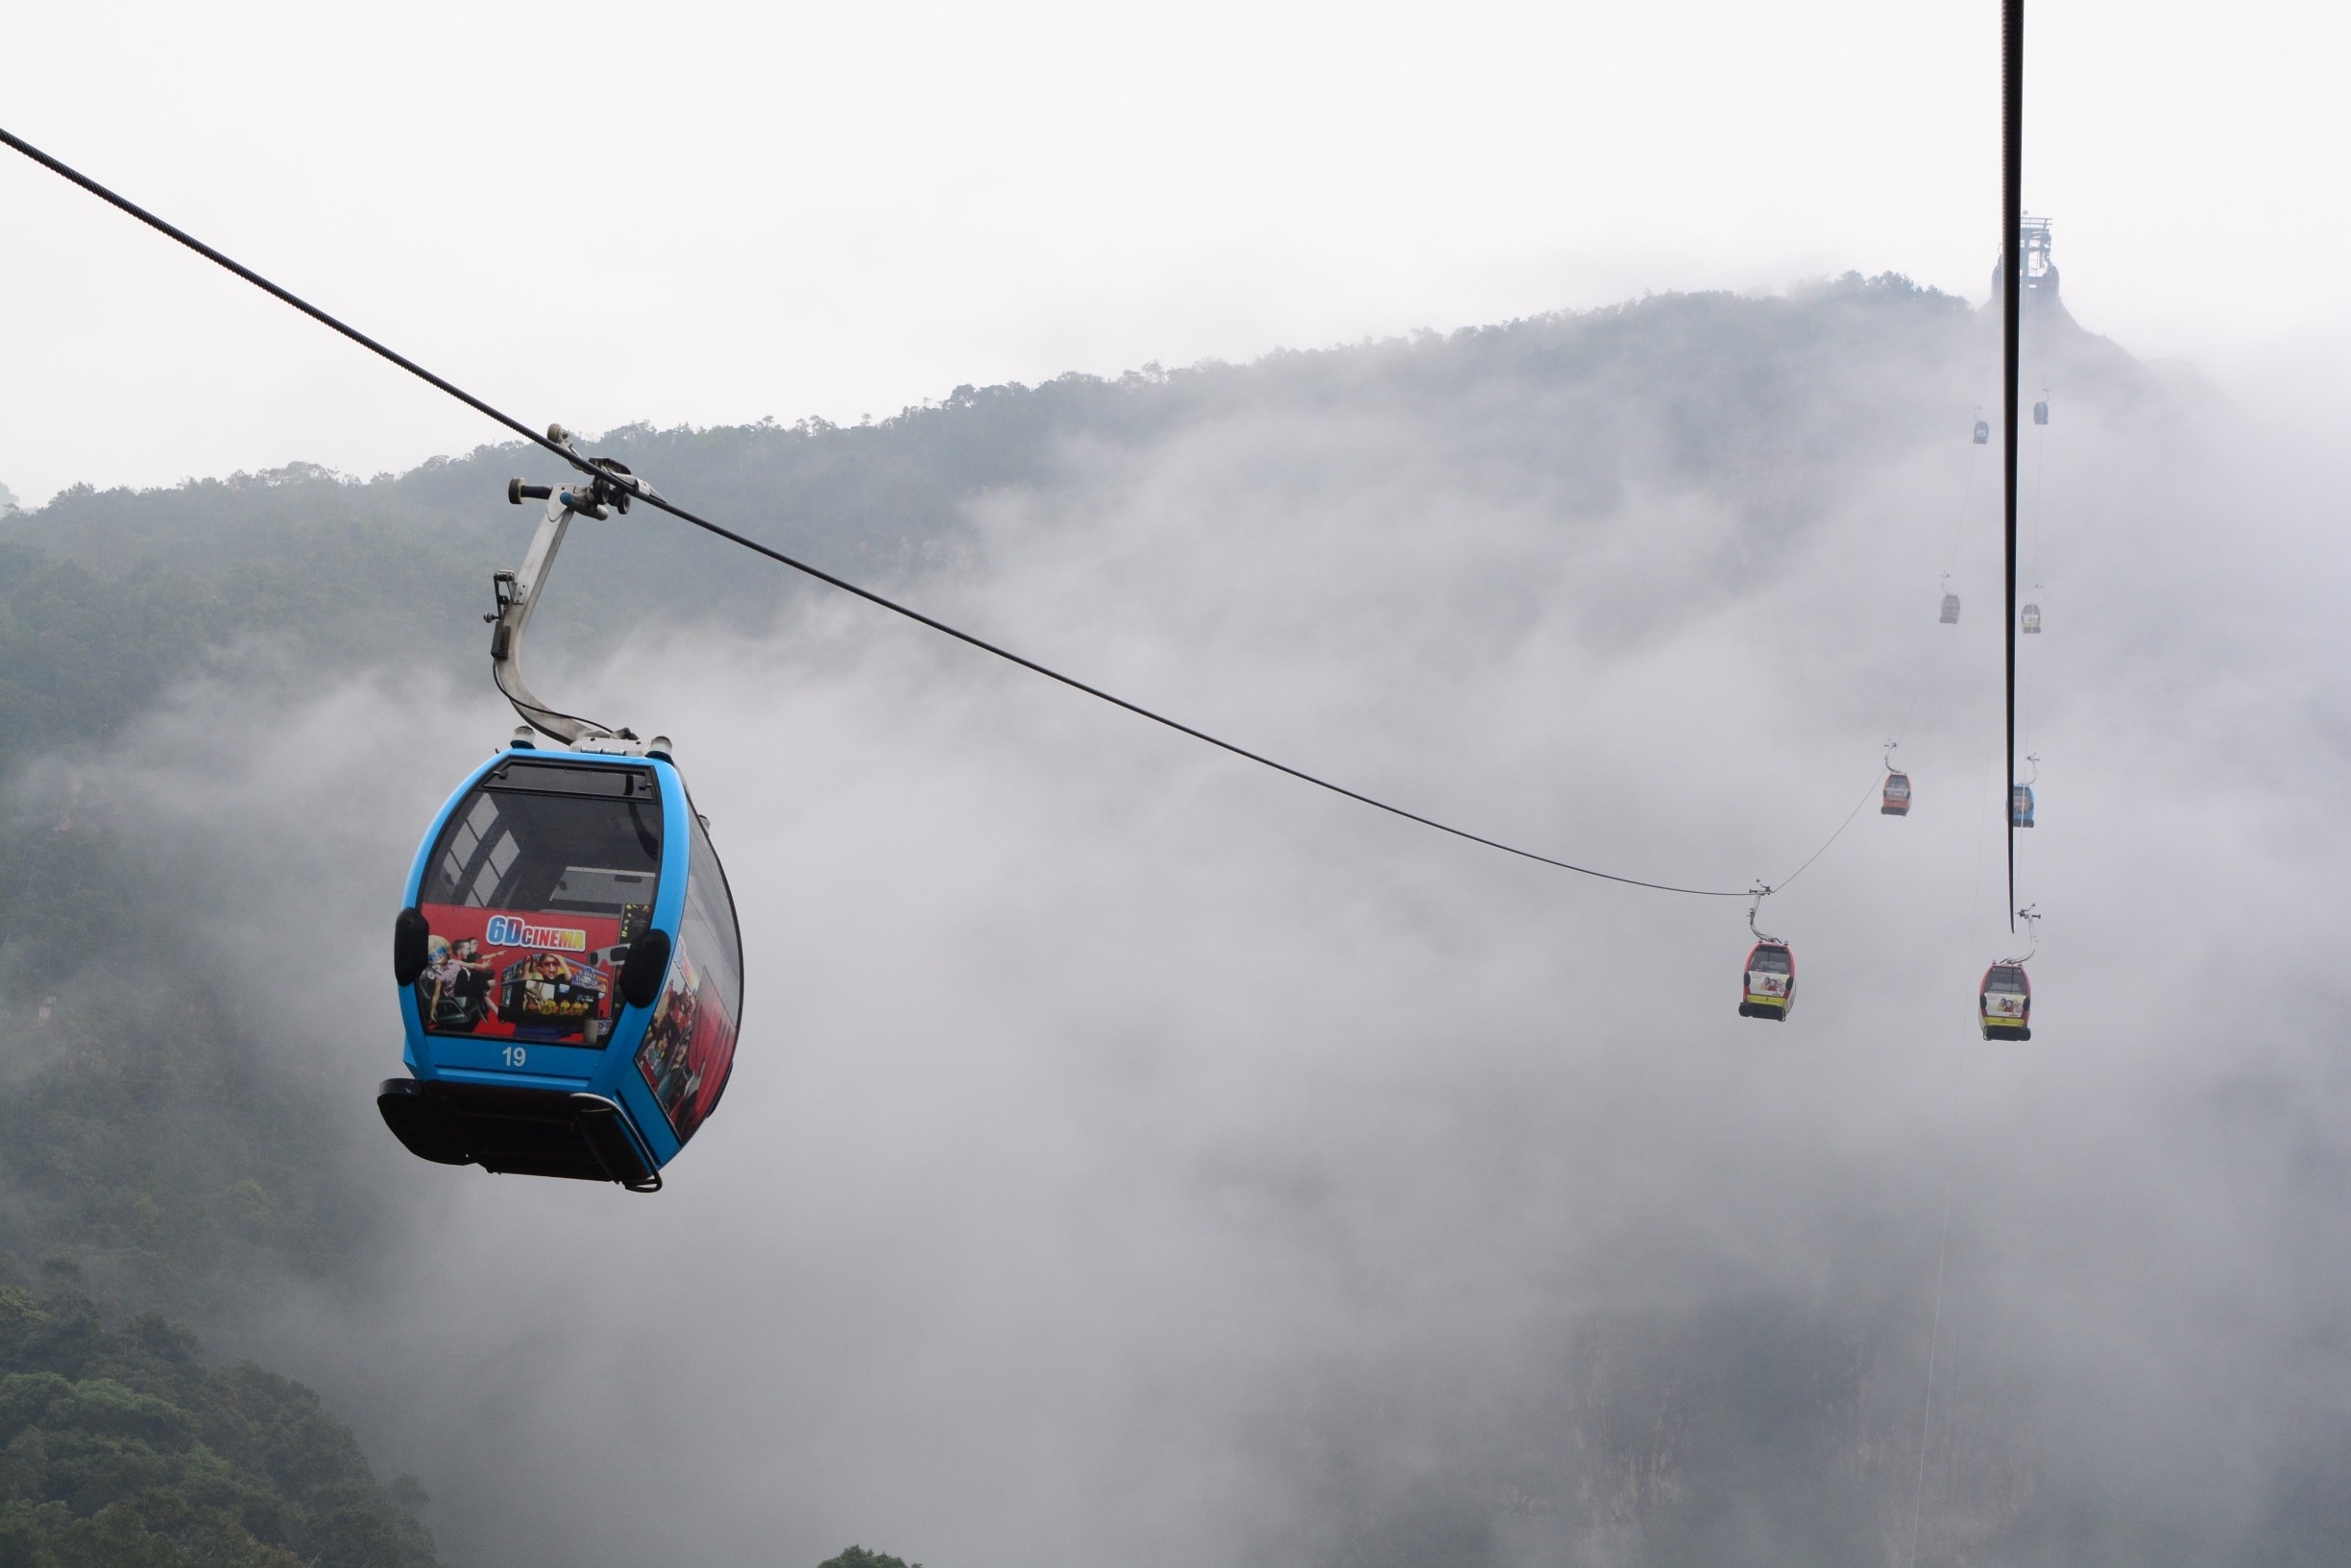 The Langkawi cable car ride in Malaysia. Though the fog obscures some the view, it makes a for a stunning atmosphere.

#Langkawai #Malaysia